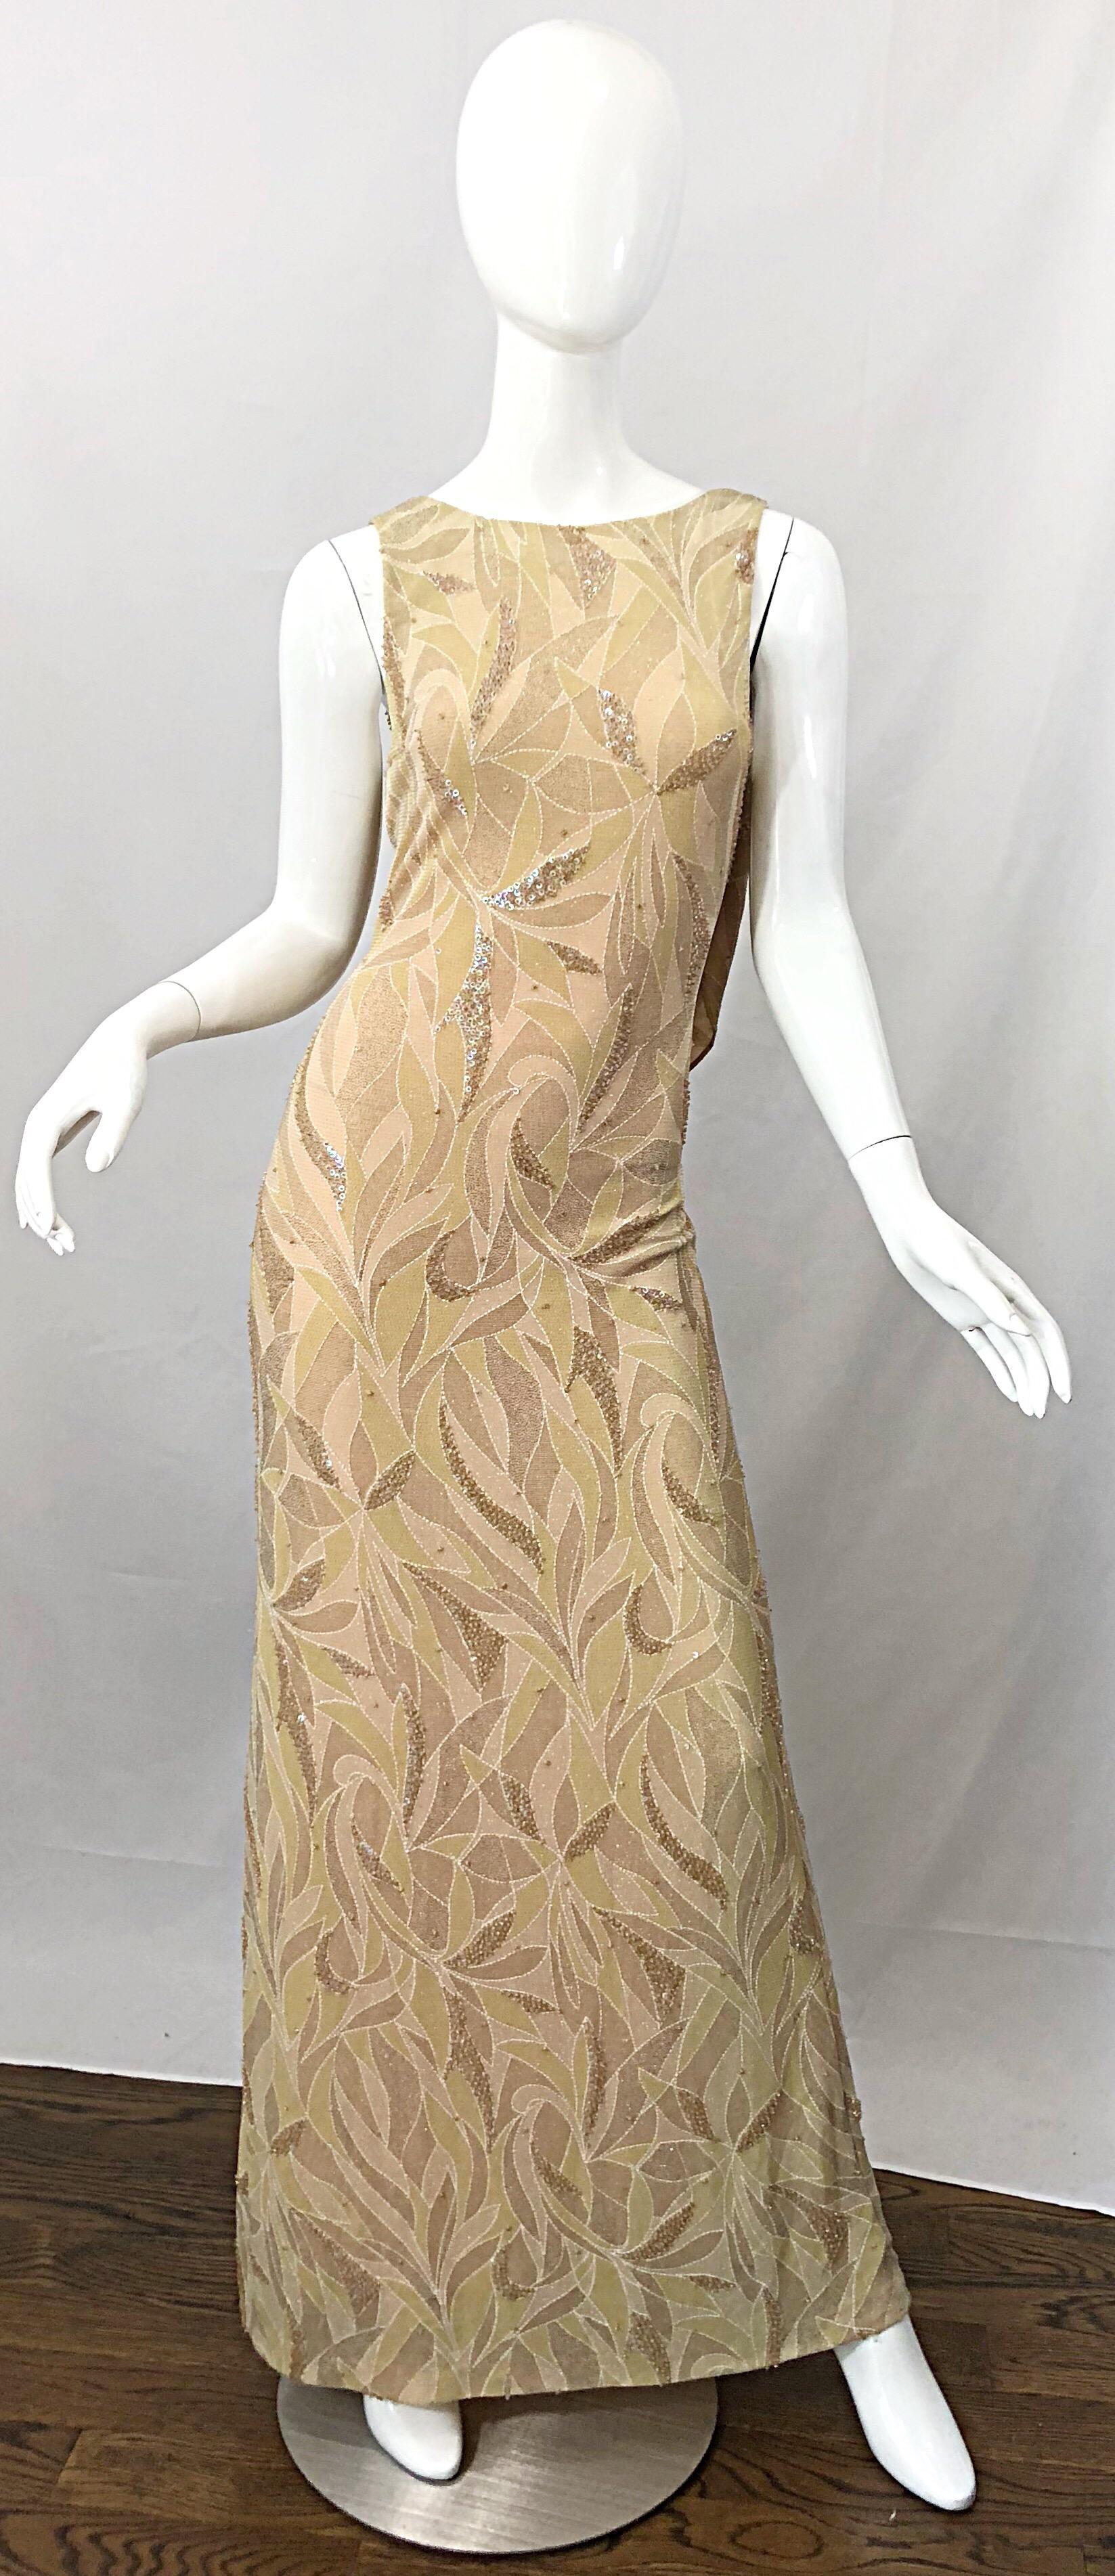 Beautiful 90s BOB MACKIE gold and champagne sequined evening dress and matching shawl! Features leaf motifs with hundreds of hand-sewn iridescent sequins sporadically throughout. Flattering draped plunging back. Hugs the body in all the right